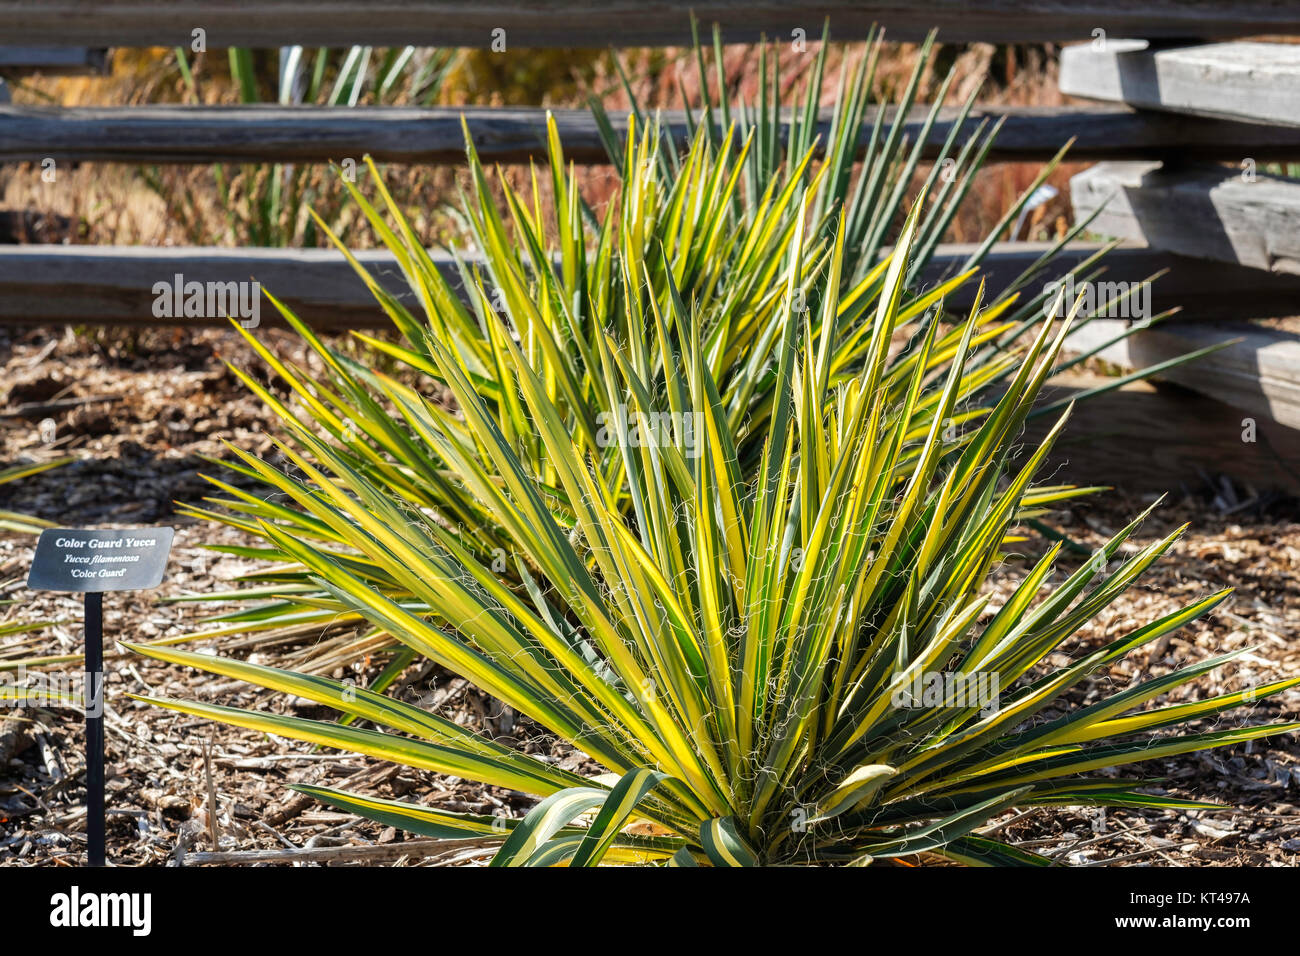 Color Guard yucca, Yucca filamentosa, 'Color Guard' and name plate after  a freeze with blooms gone. Oklahoma, USA. Stock Photo